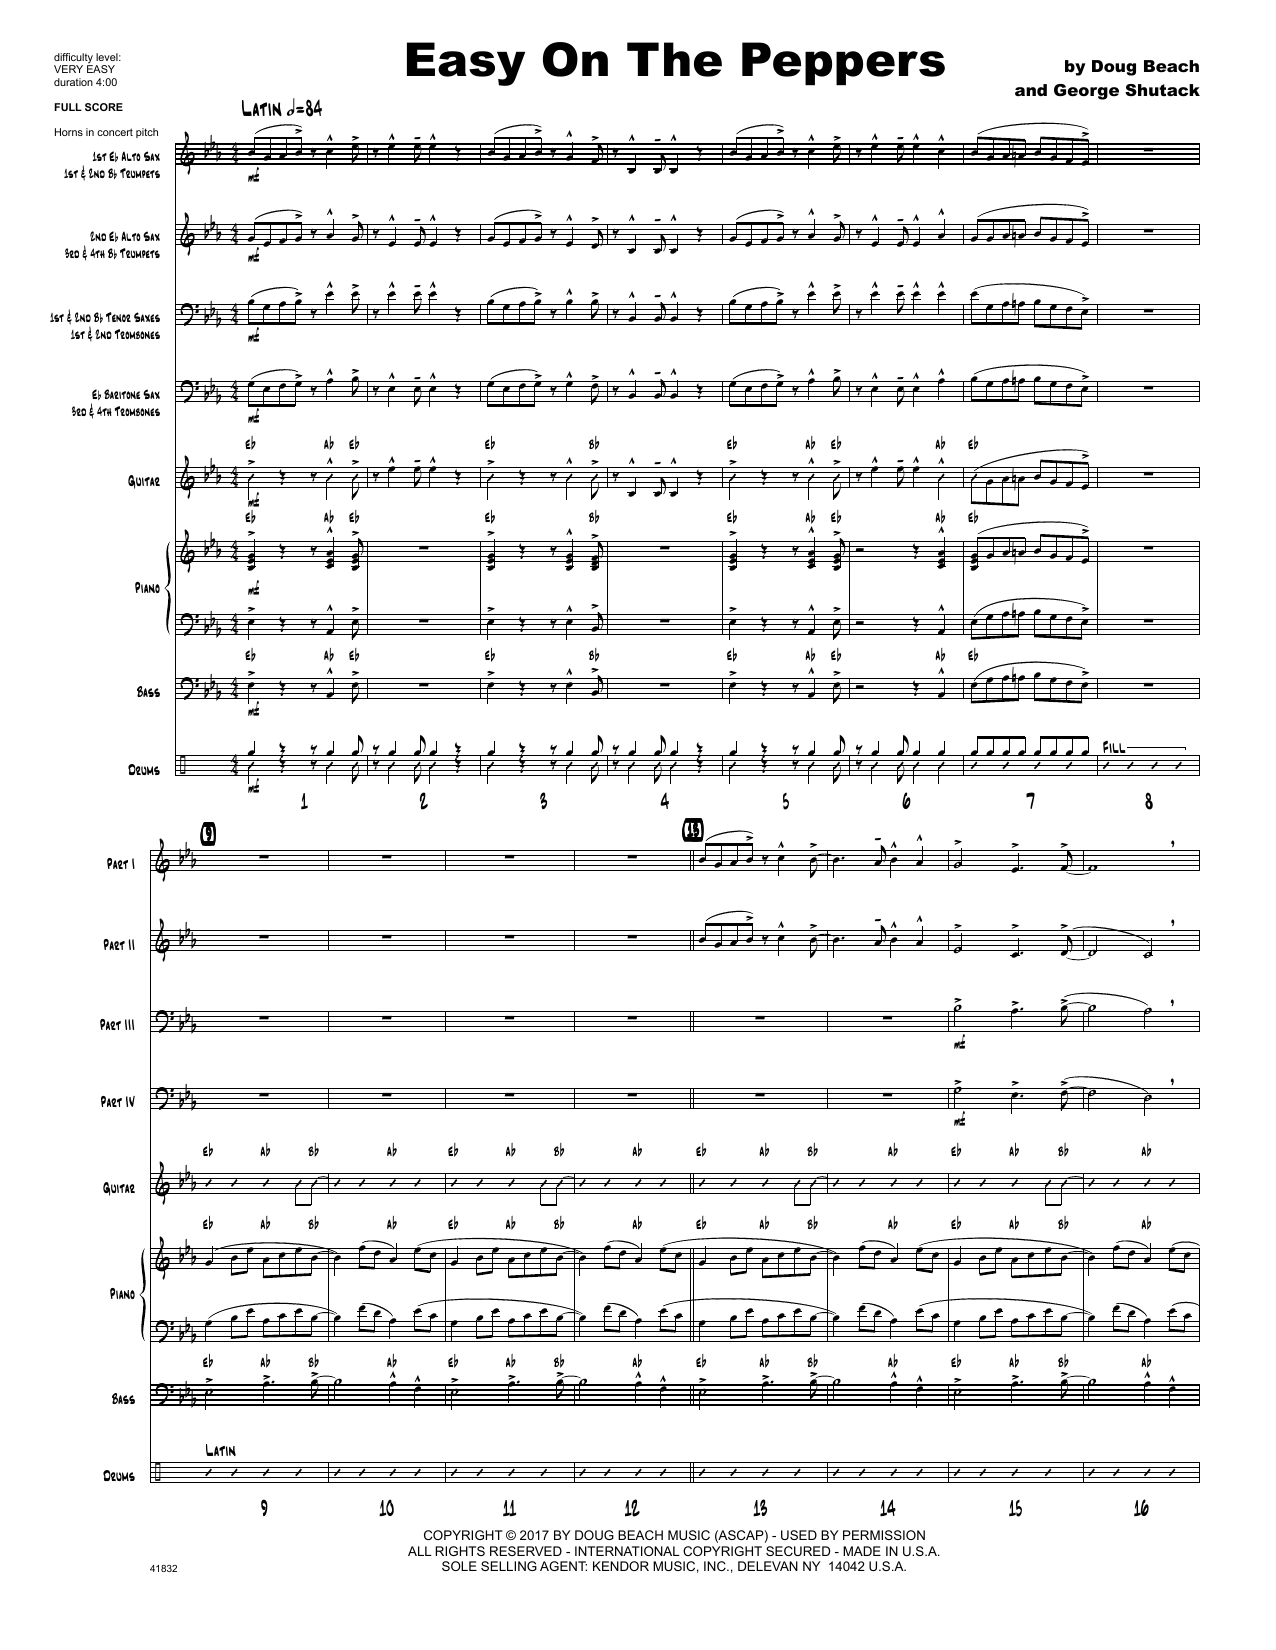 Download Doug Beach & George Shutack Easy On The Peppers - Full Score Sheet Music